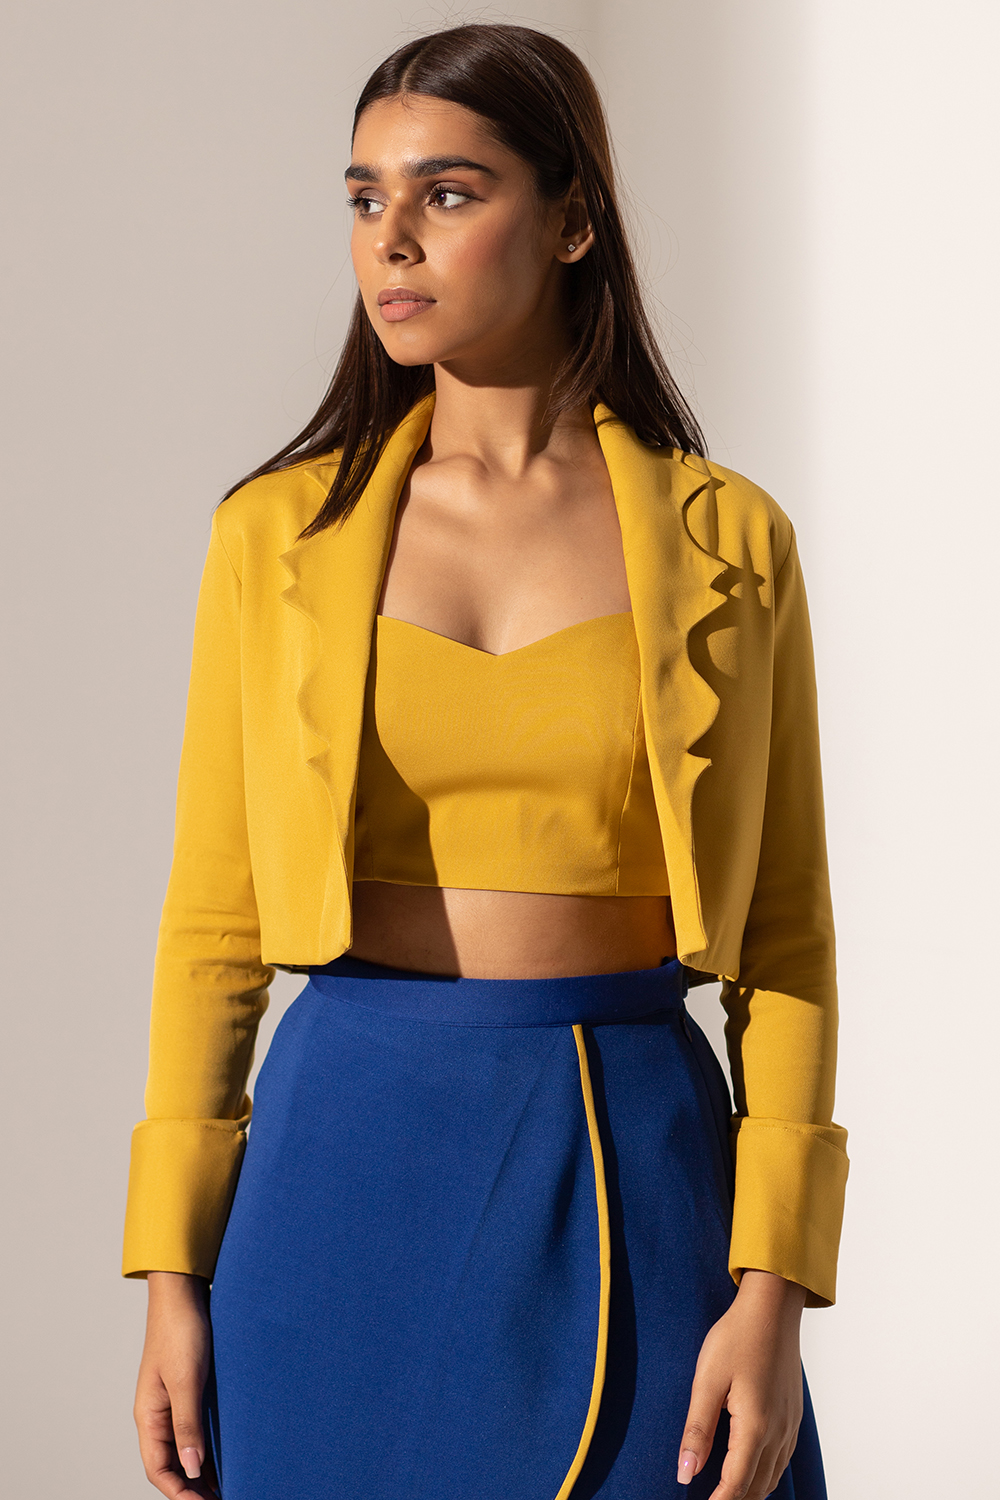 Yellow and Blue Skirt Set